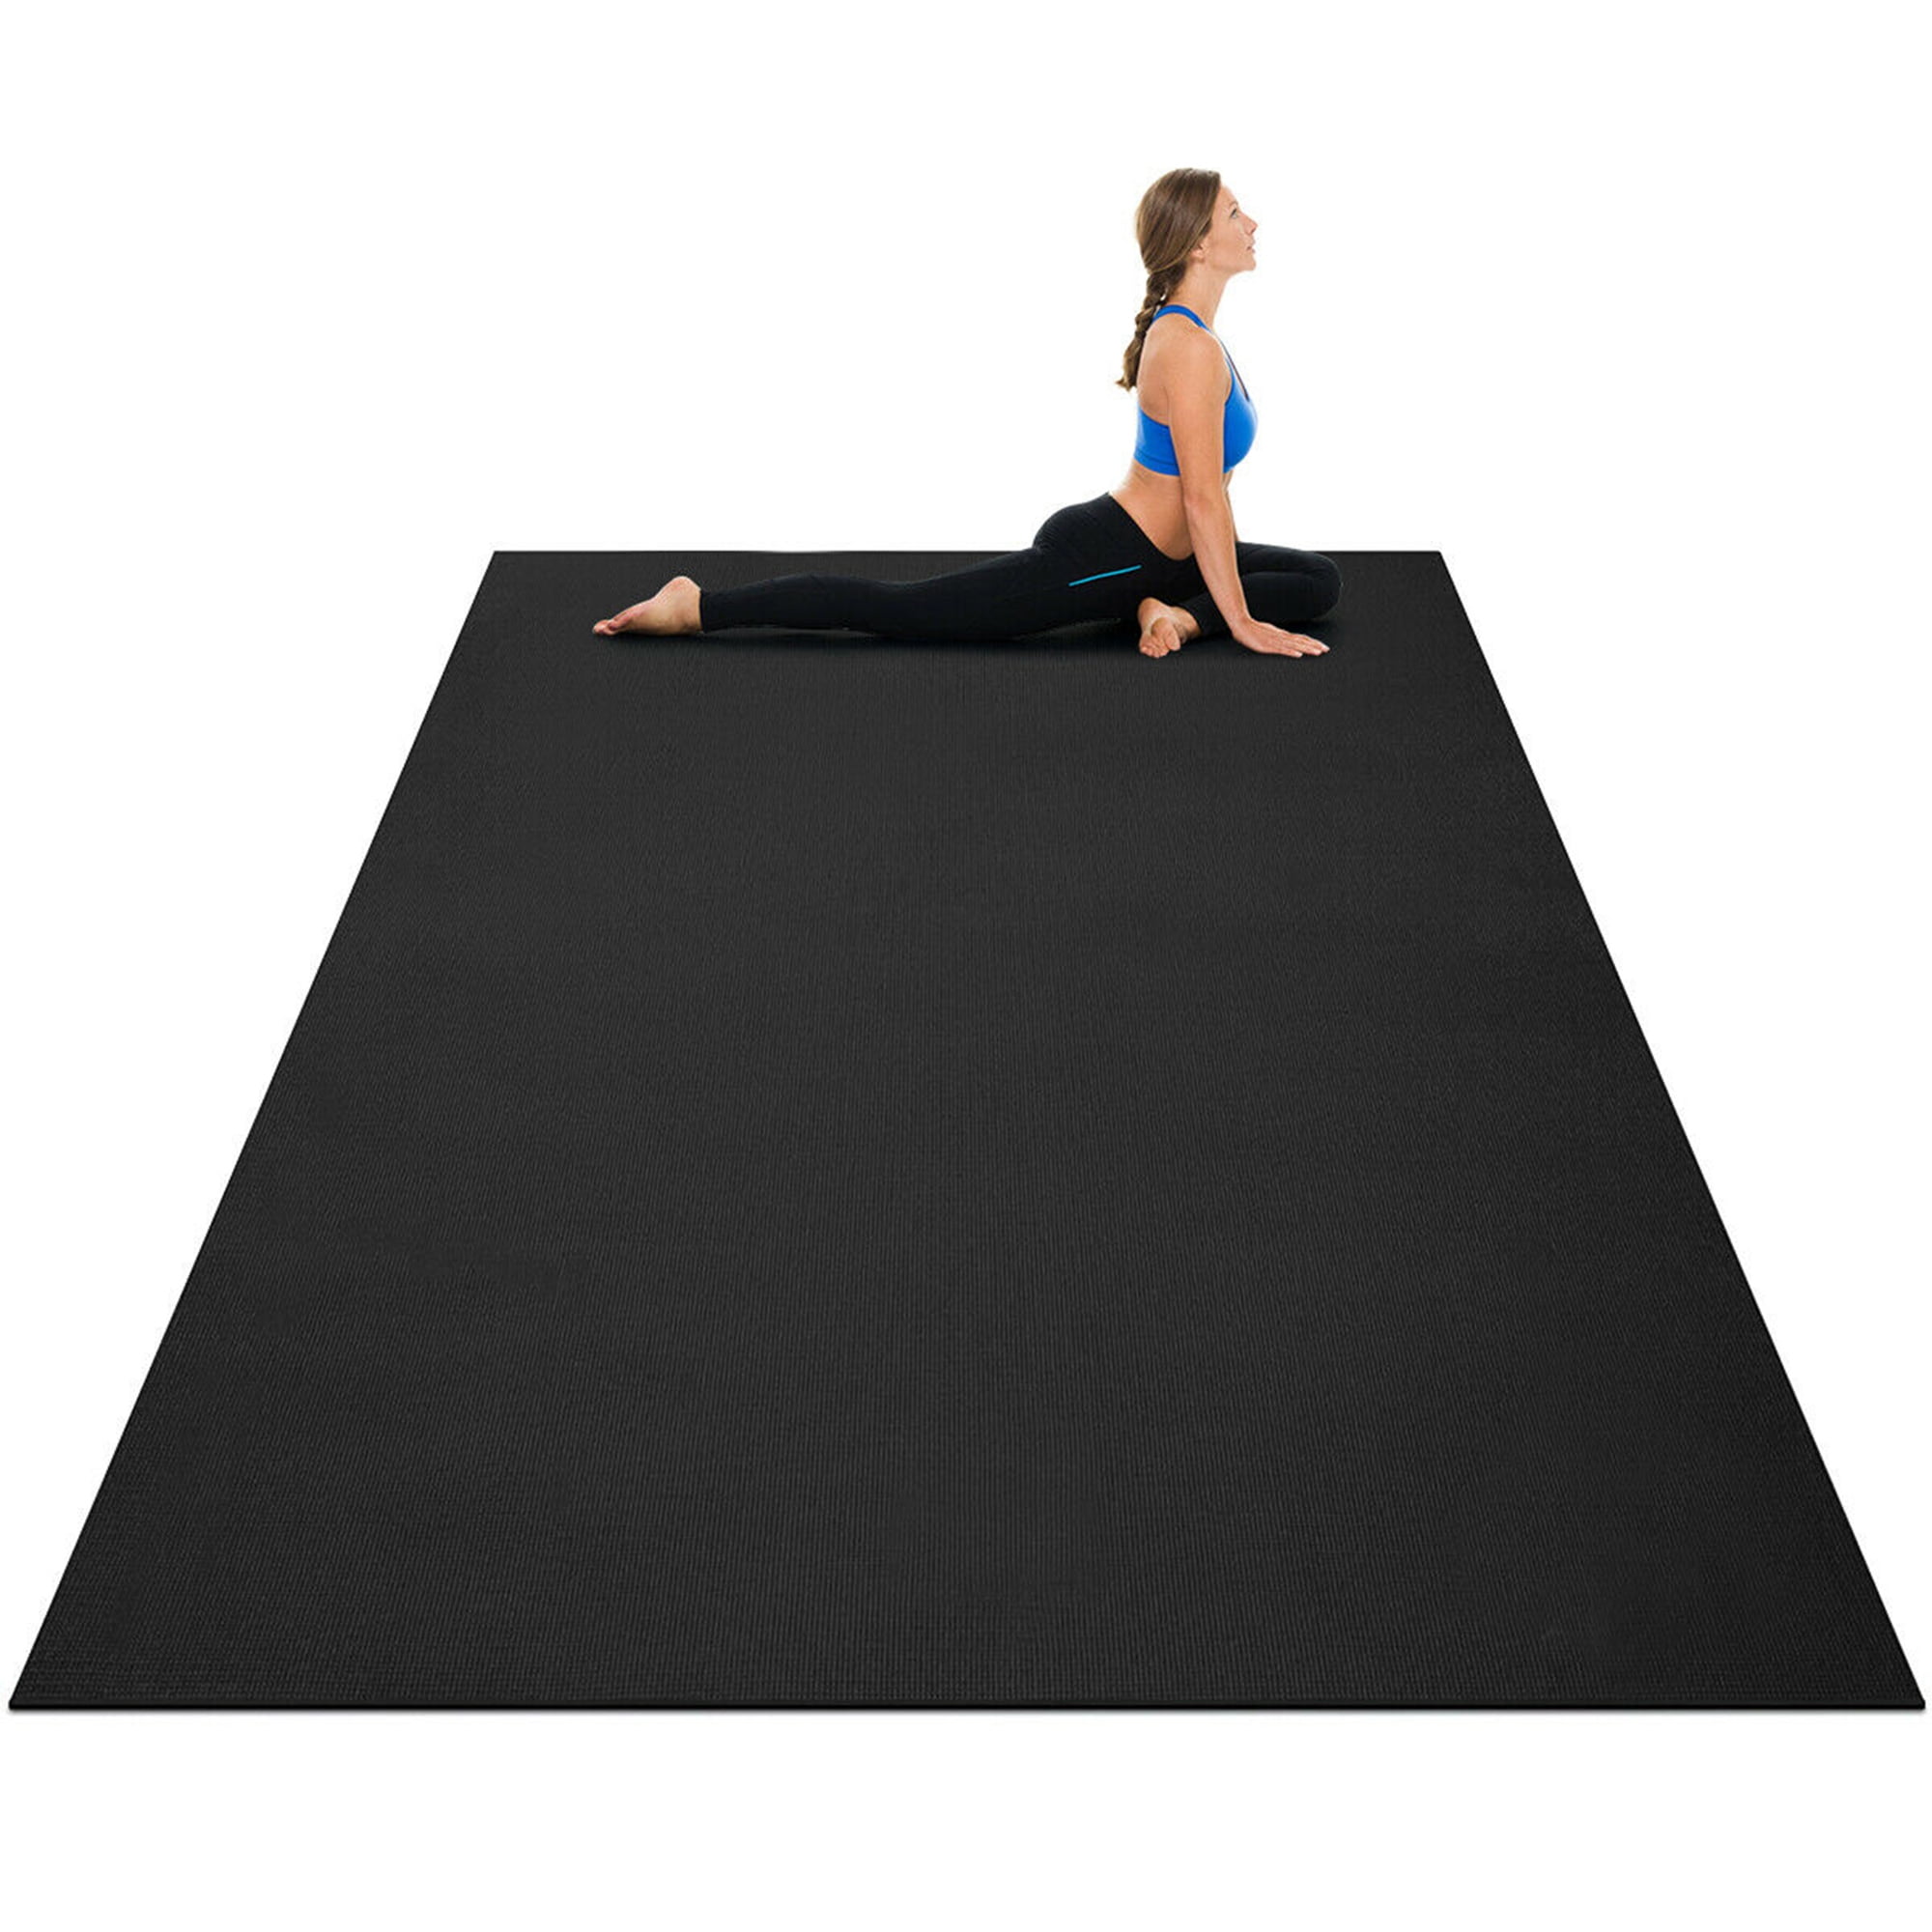 OVASTLKUY Large Yoga Mat 8'x5x7mm for Pilates Stretching Home Gym Workout Extra 